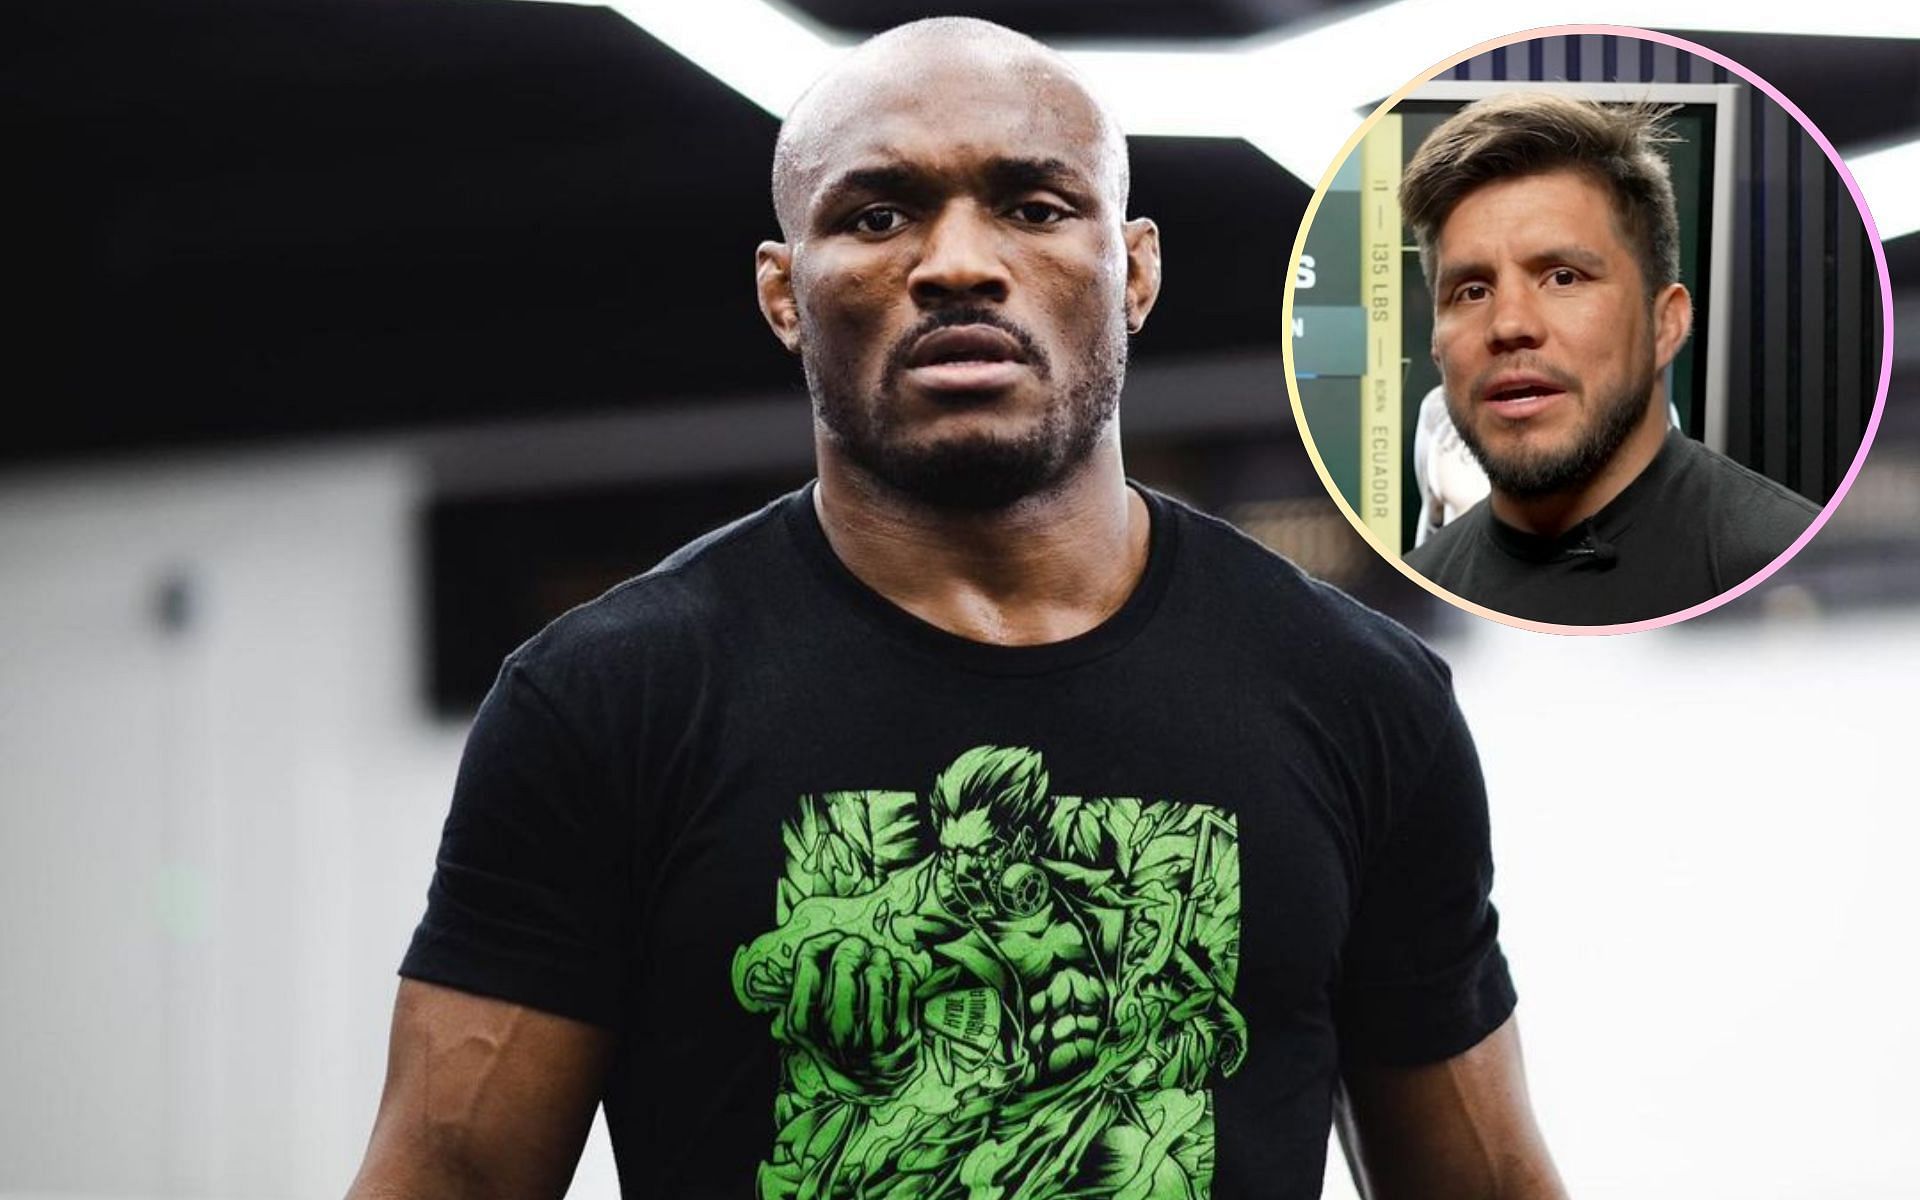 Henry Cejudo and Kamaru Usman reflect on a female sparring partner who previously outperformed 